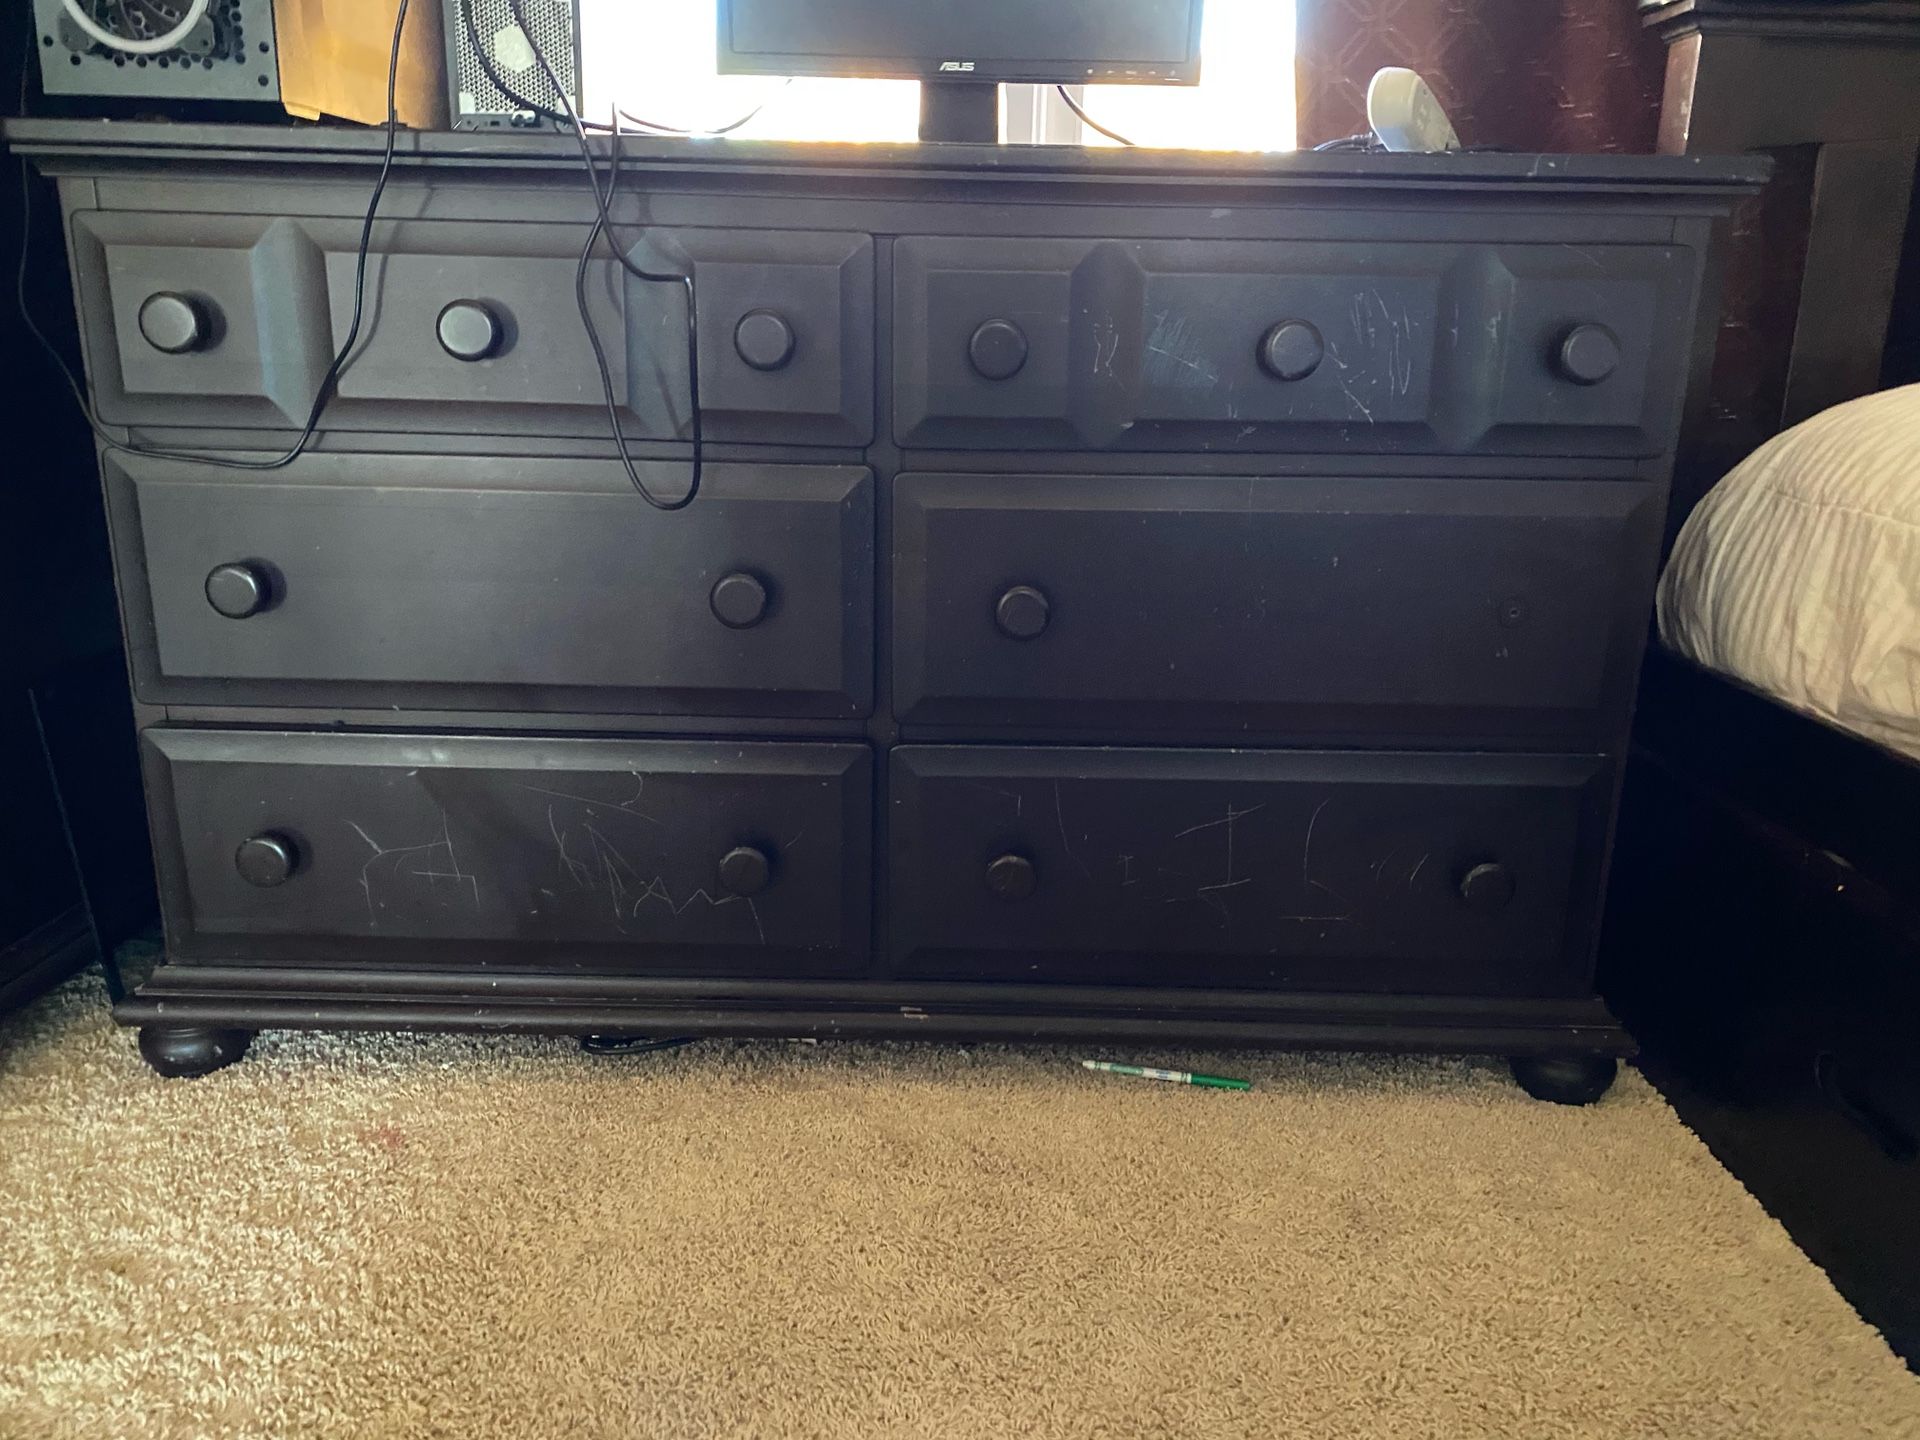 Full size bed frame, mattress, dresser with drawers, and armoire with drawers